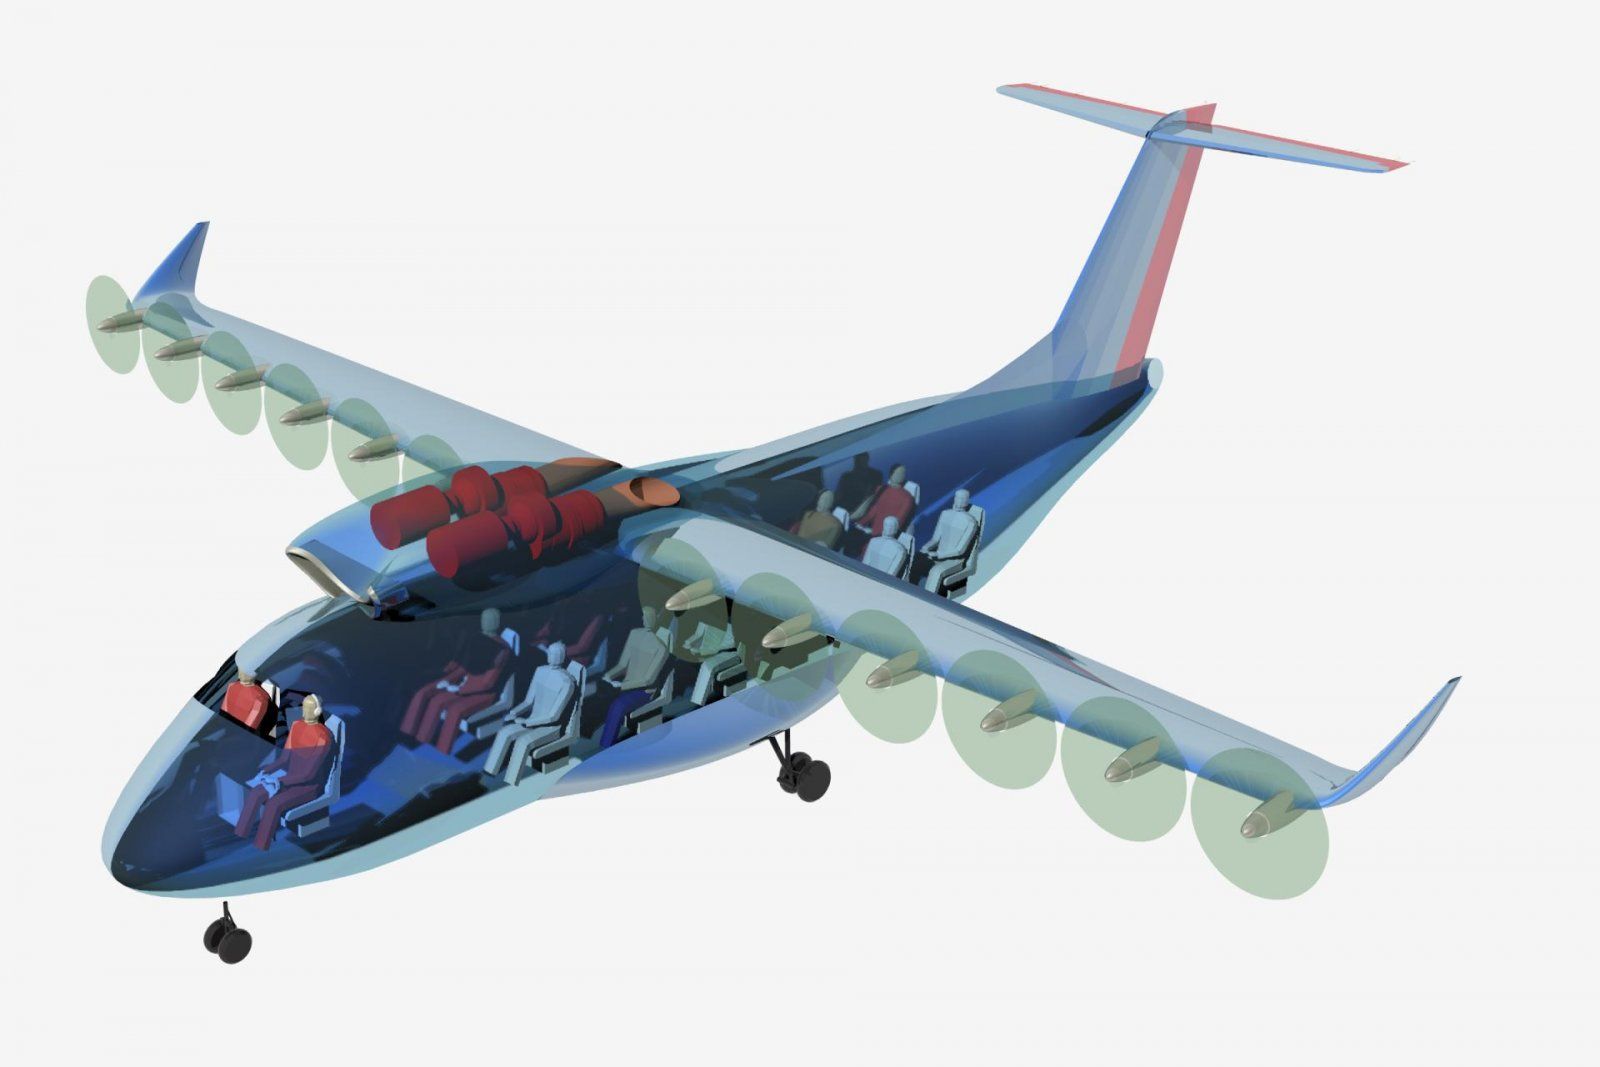 nineteen-seater-aircraft-with-electrically-driven-propellers.jpg